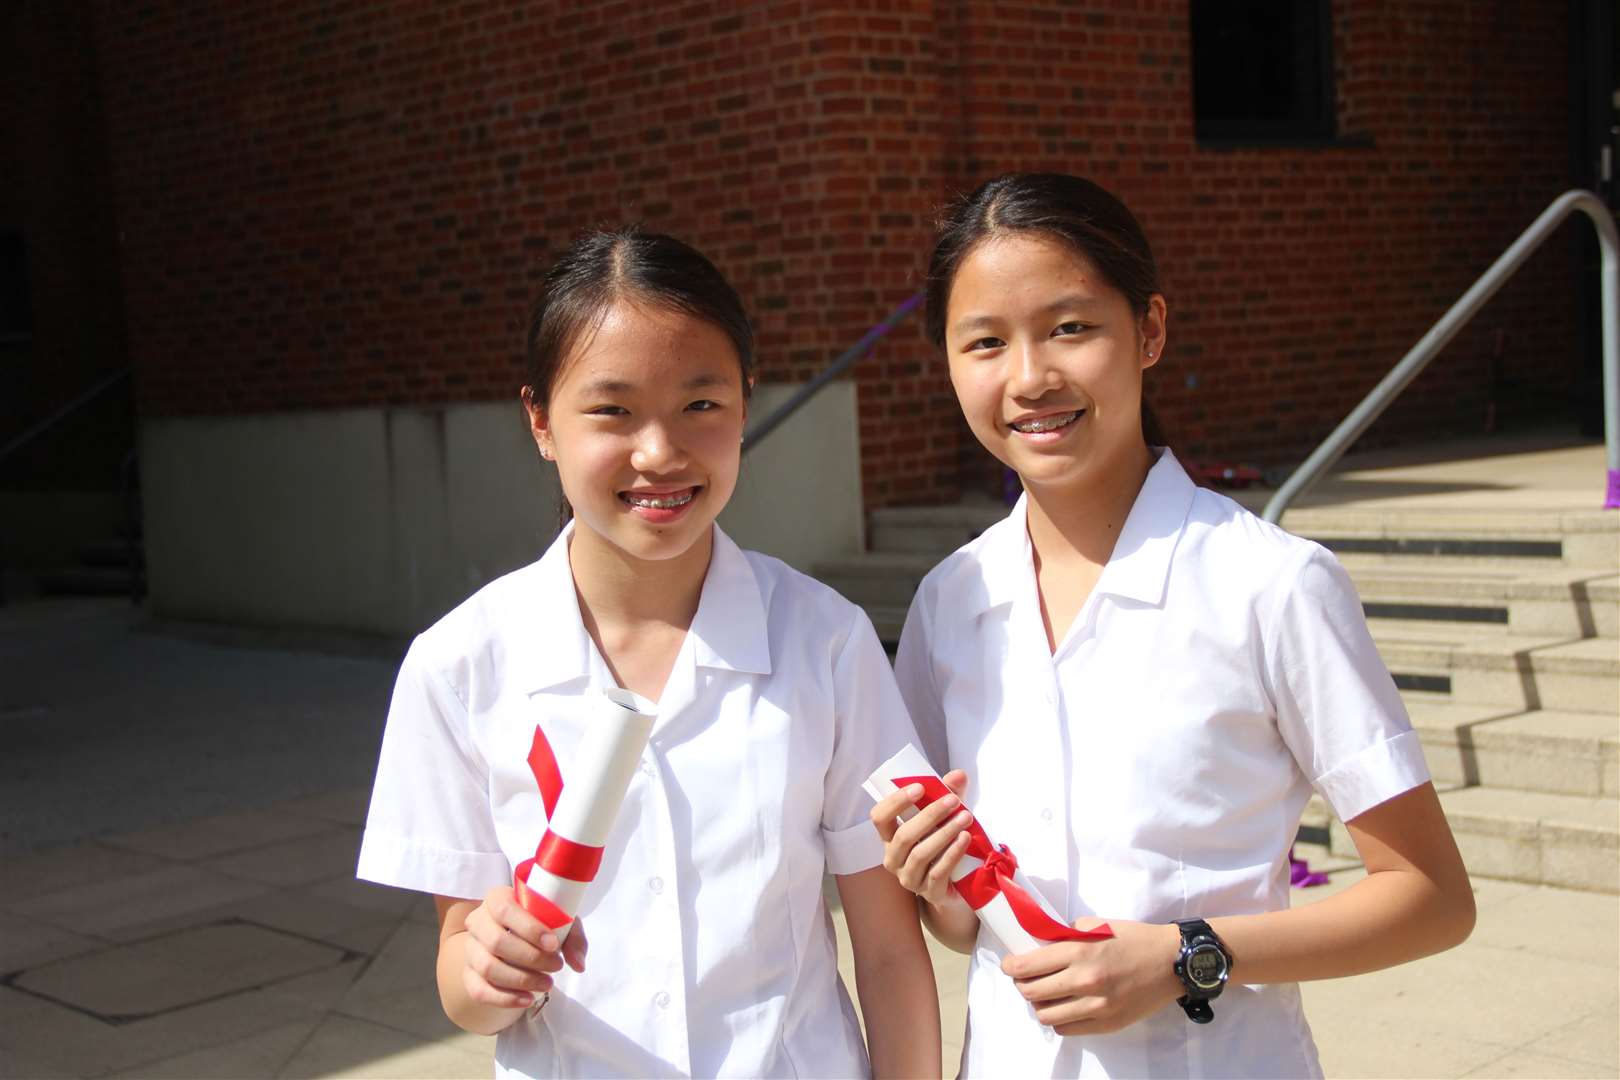 Nicola and Victoria have been at the school since they were 11. Photo: Benenden School